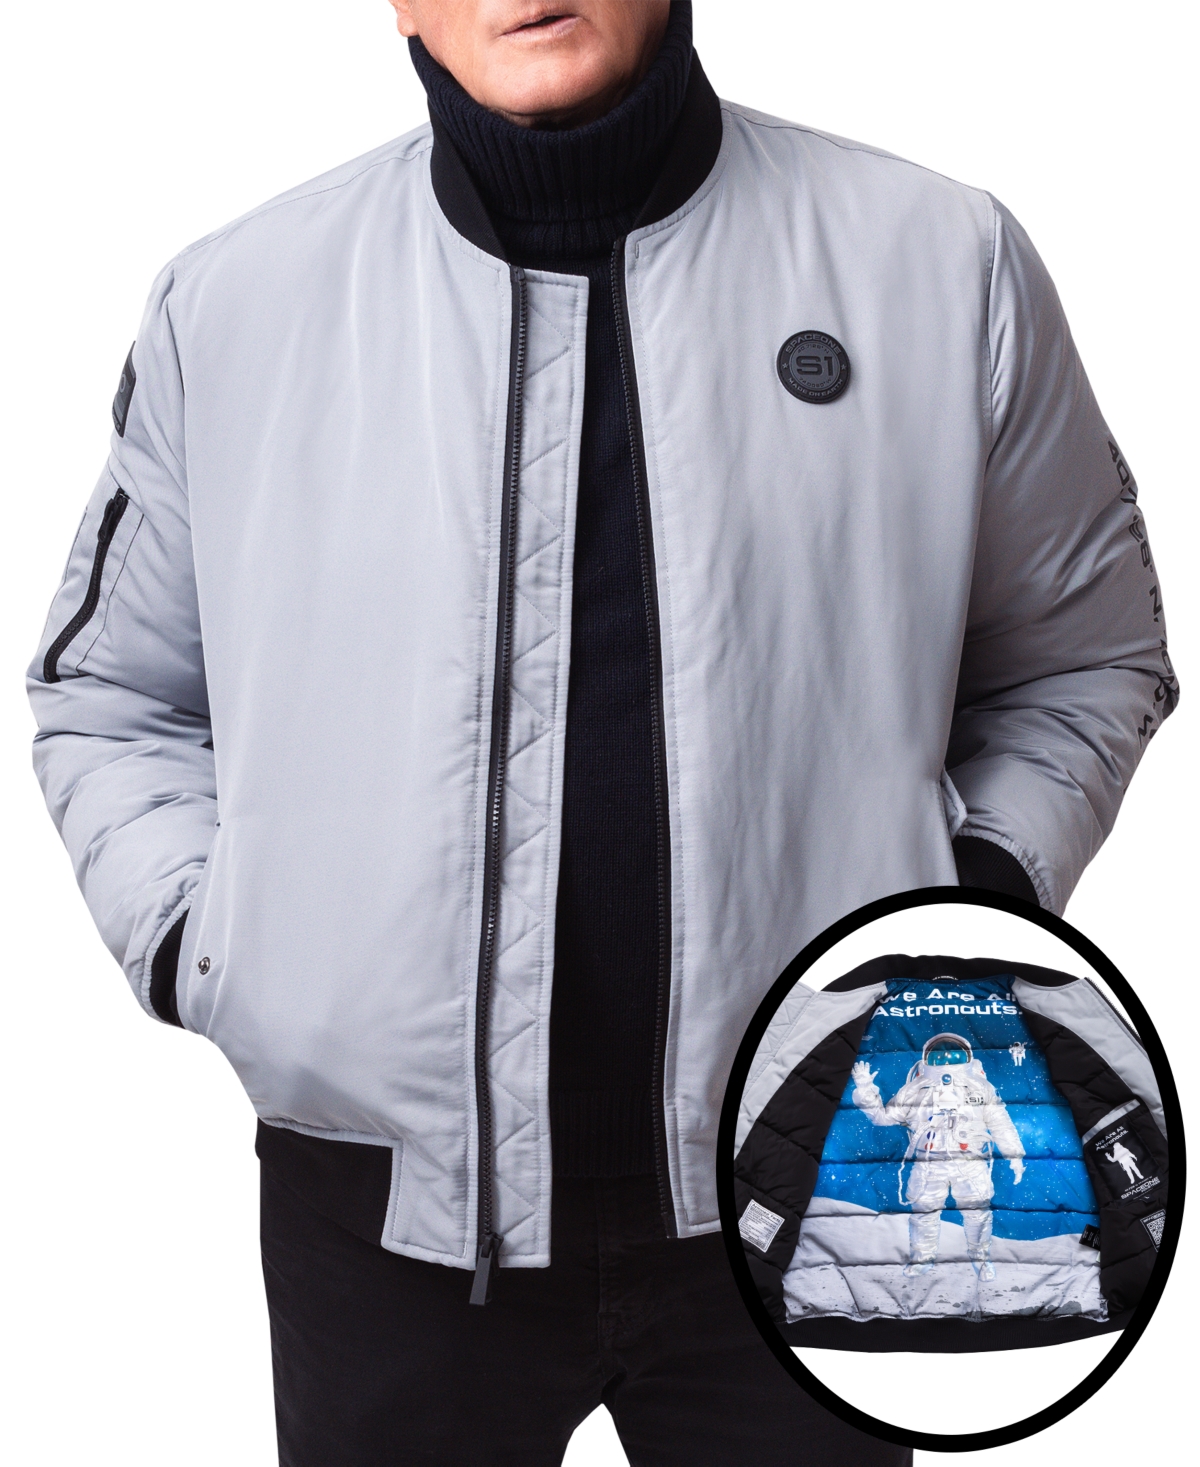 Men's Nasa Inspired Hooded Bomber Jacket with Printed Astronaut Interior - Gray